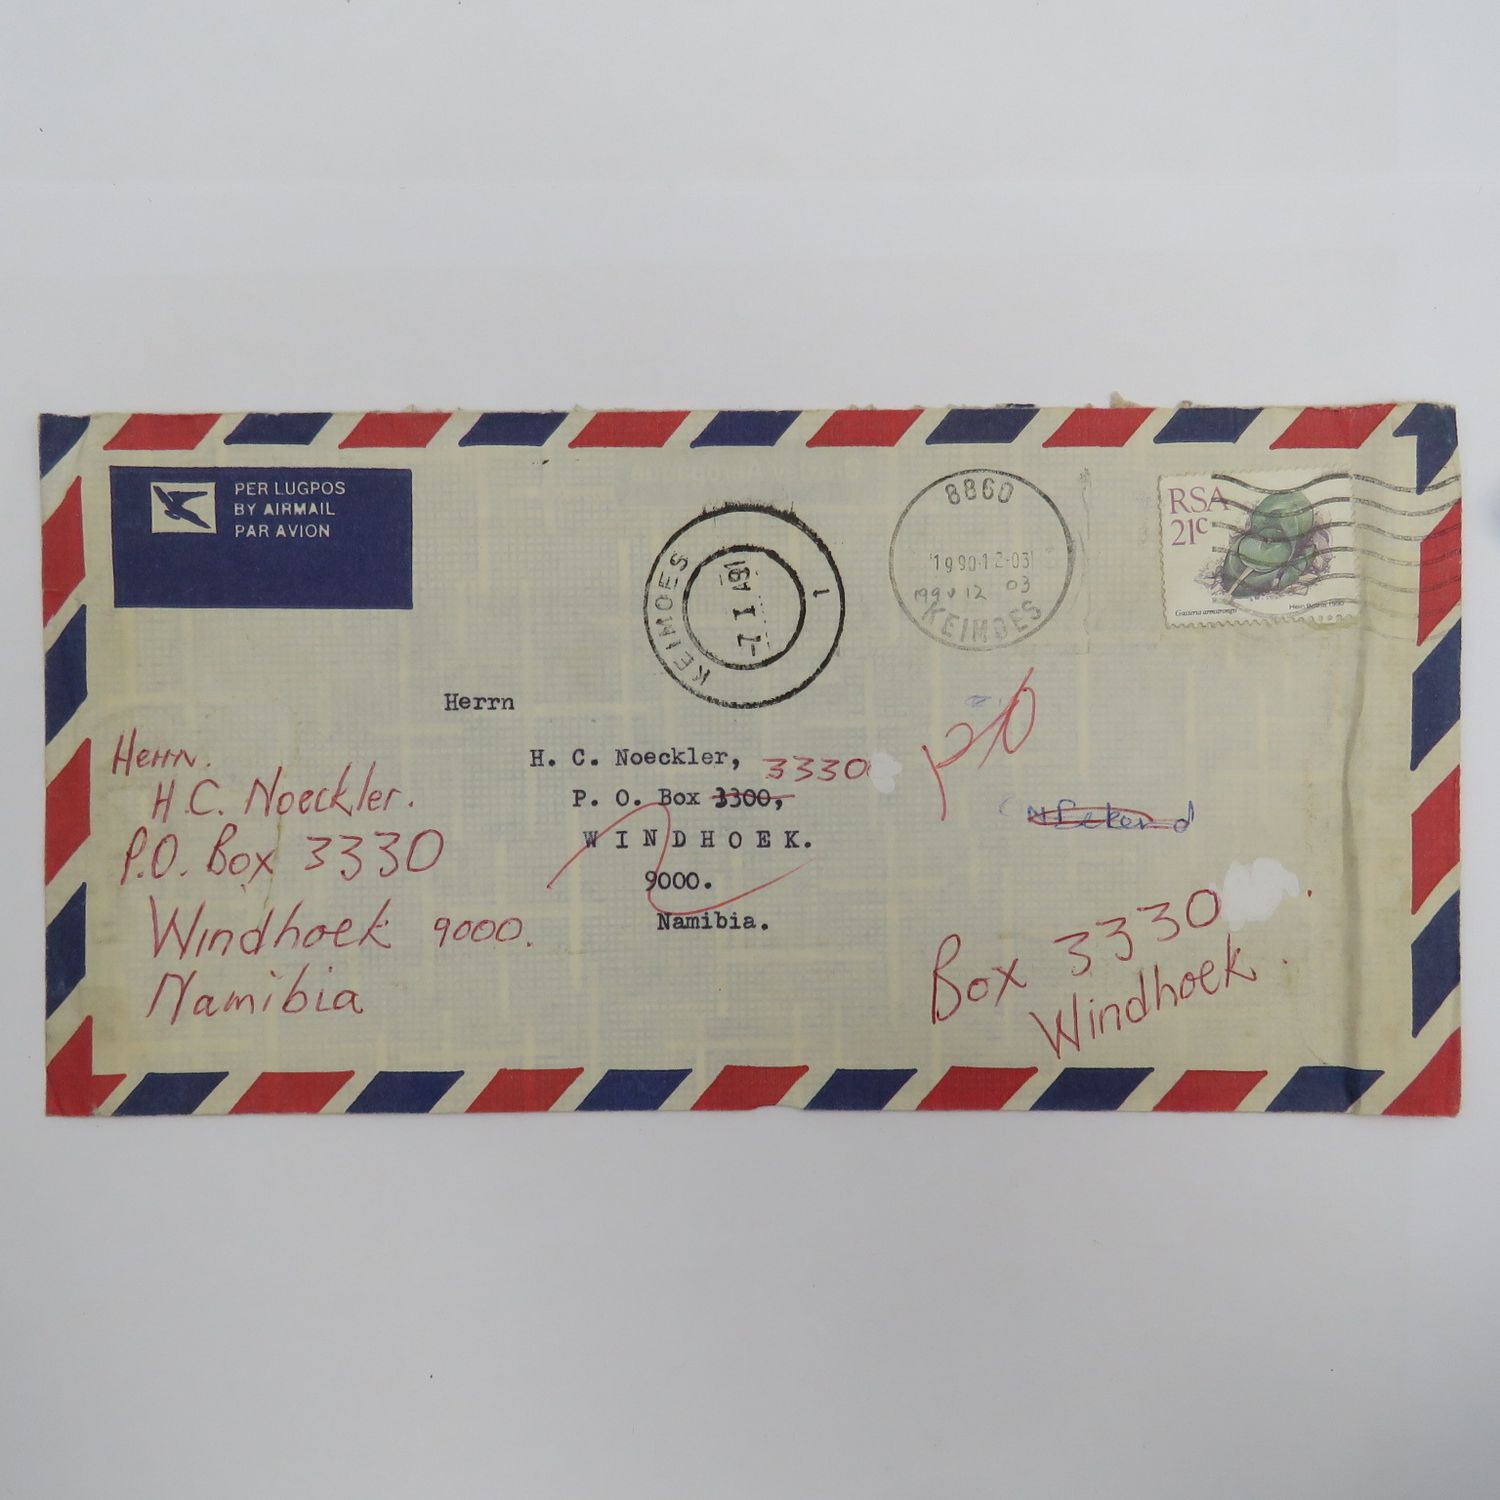 Letter posted Keimoes, South Africa to Windhoek Namibia on 3-12-1990 - returned to Keimoes and posted again on 7 January 1991 to the correct Windhoek P.O.Box